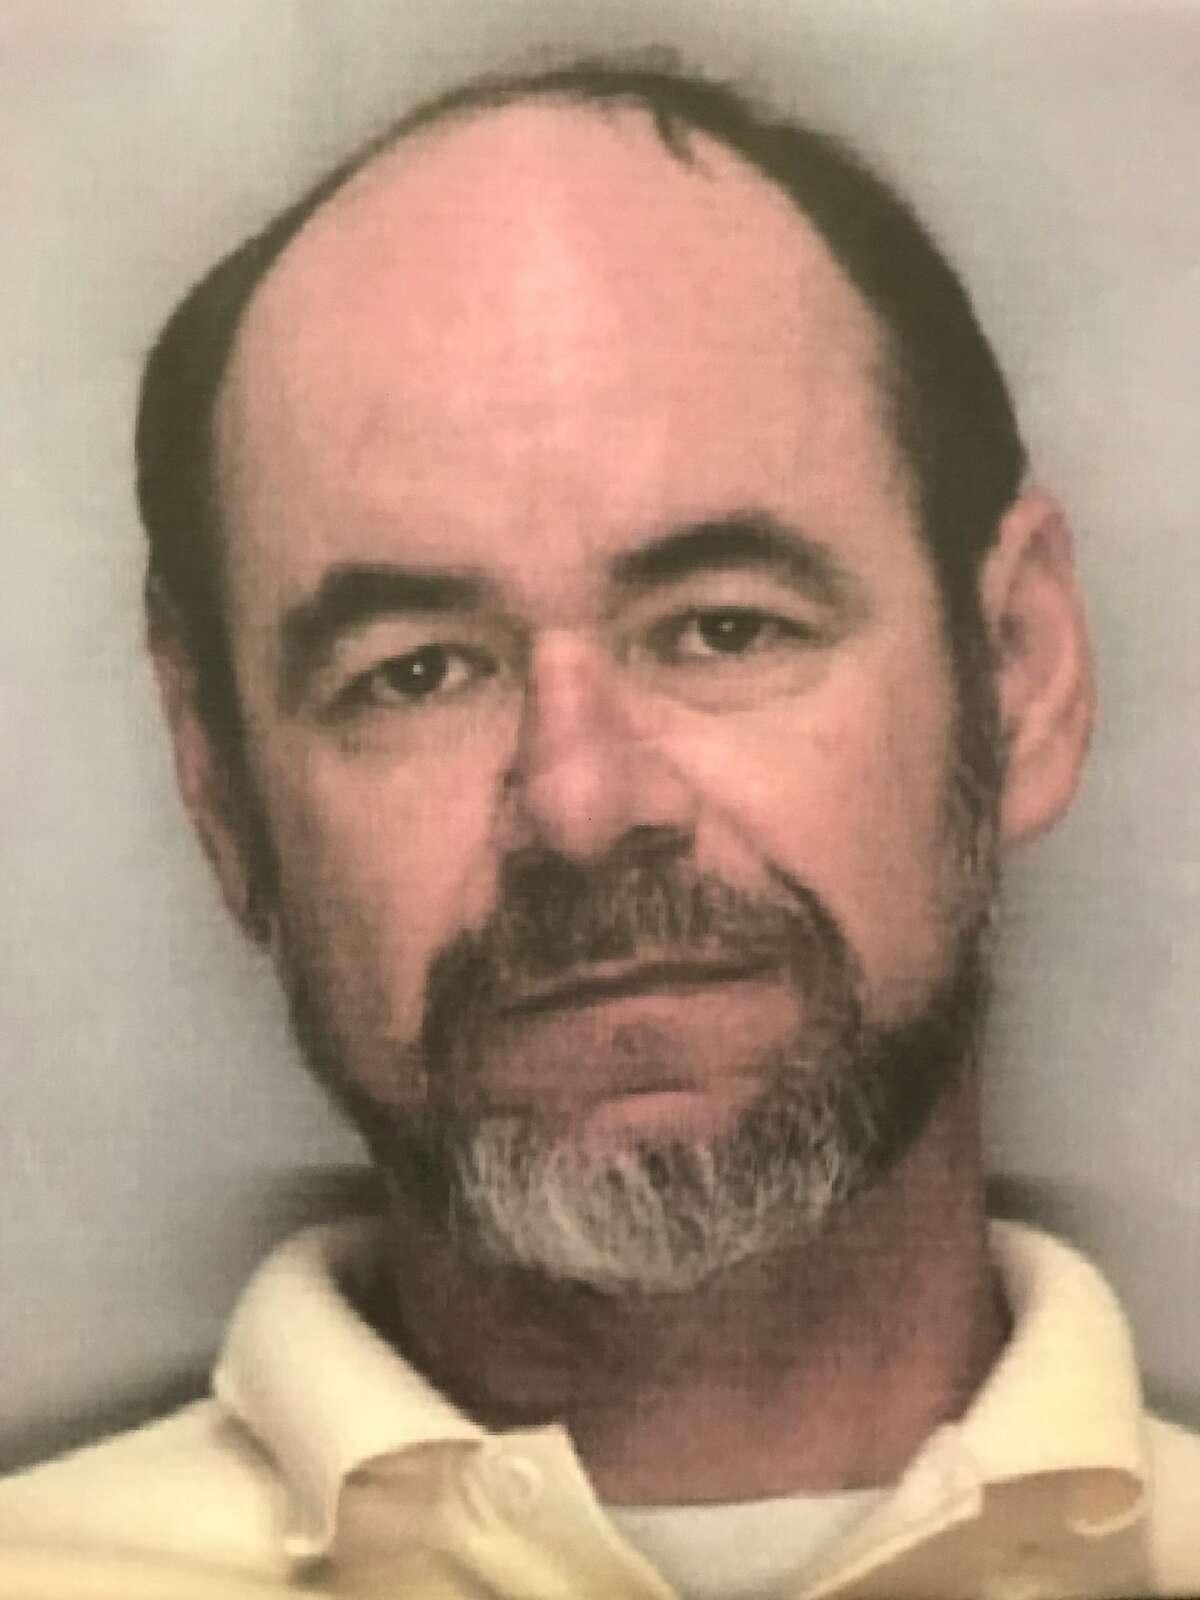 Undated photo of Stephen Blake Crawford, who committed suicide earlier today when the sheriff's department was at his door to serve a search warrant. He is the suspect in killing of Arlis Perry at Stanford Memorial Church in 1974. Photo provided by Santa Clara County Sheriff's Department